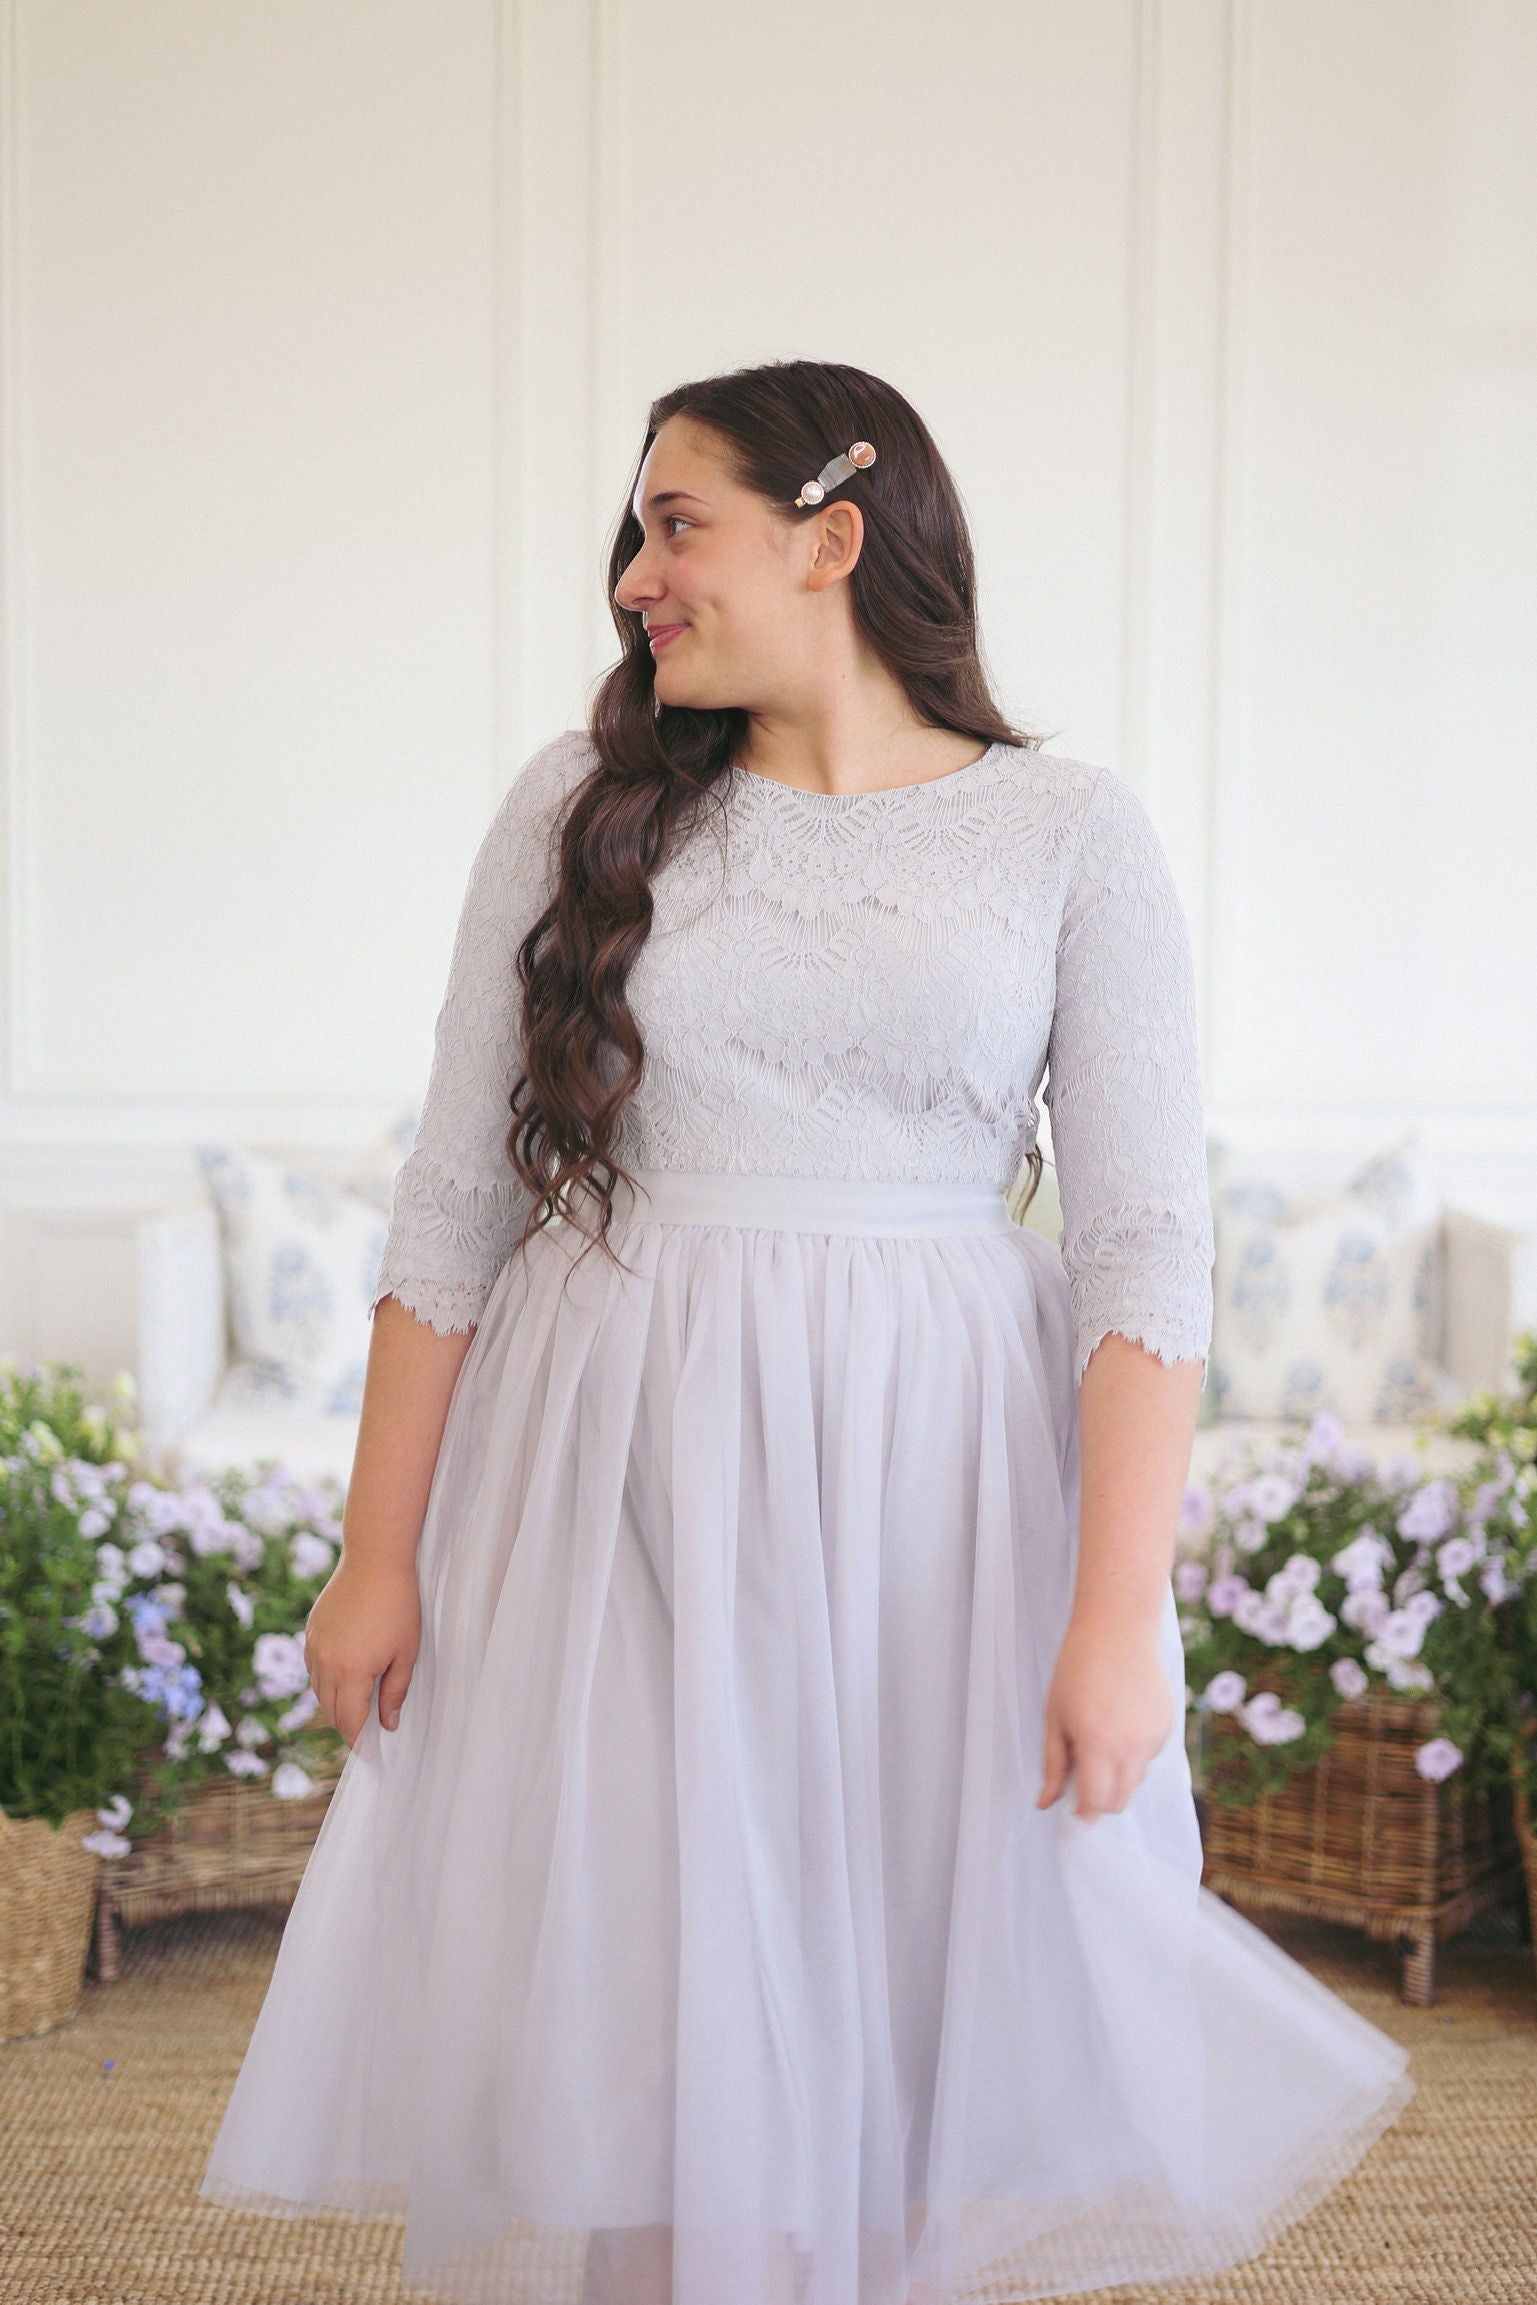 Whimsical Wishes Dress (7 Colors, Knee length)